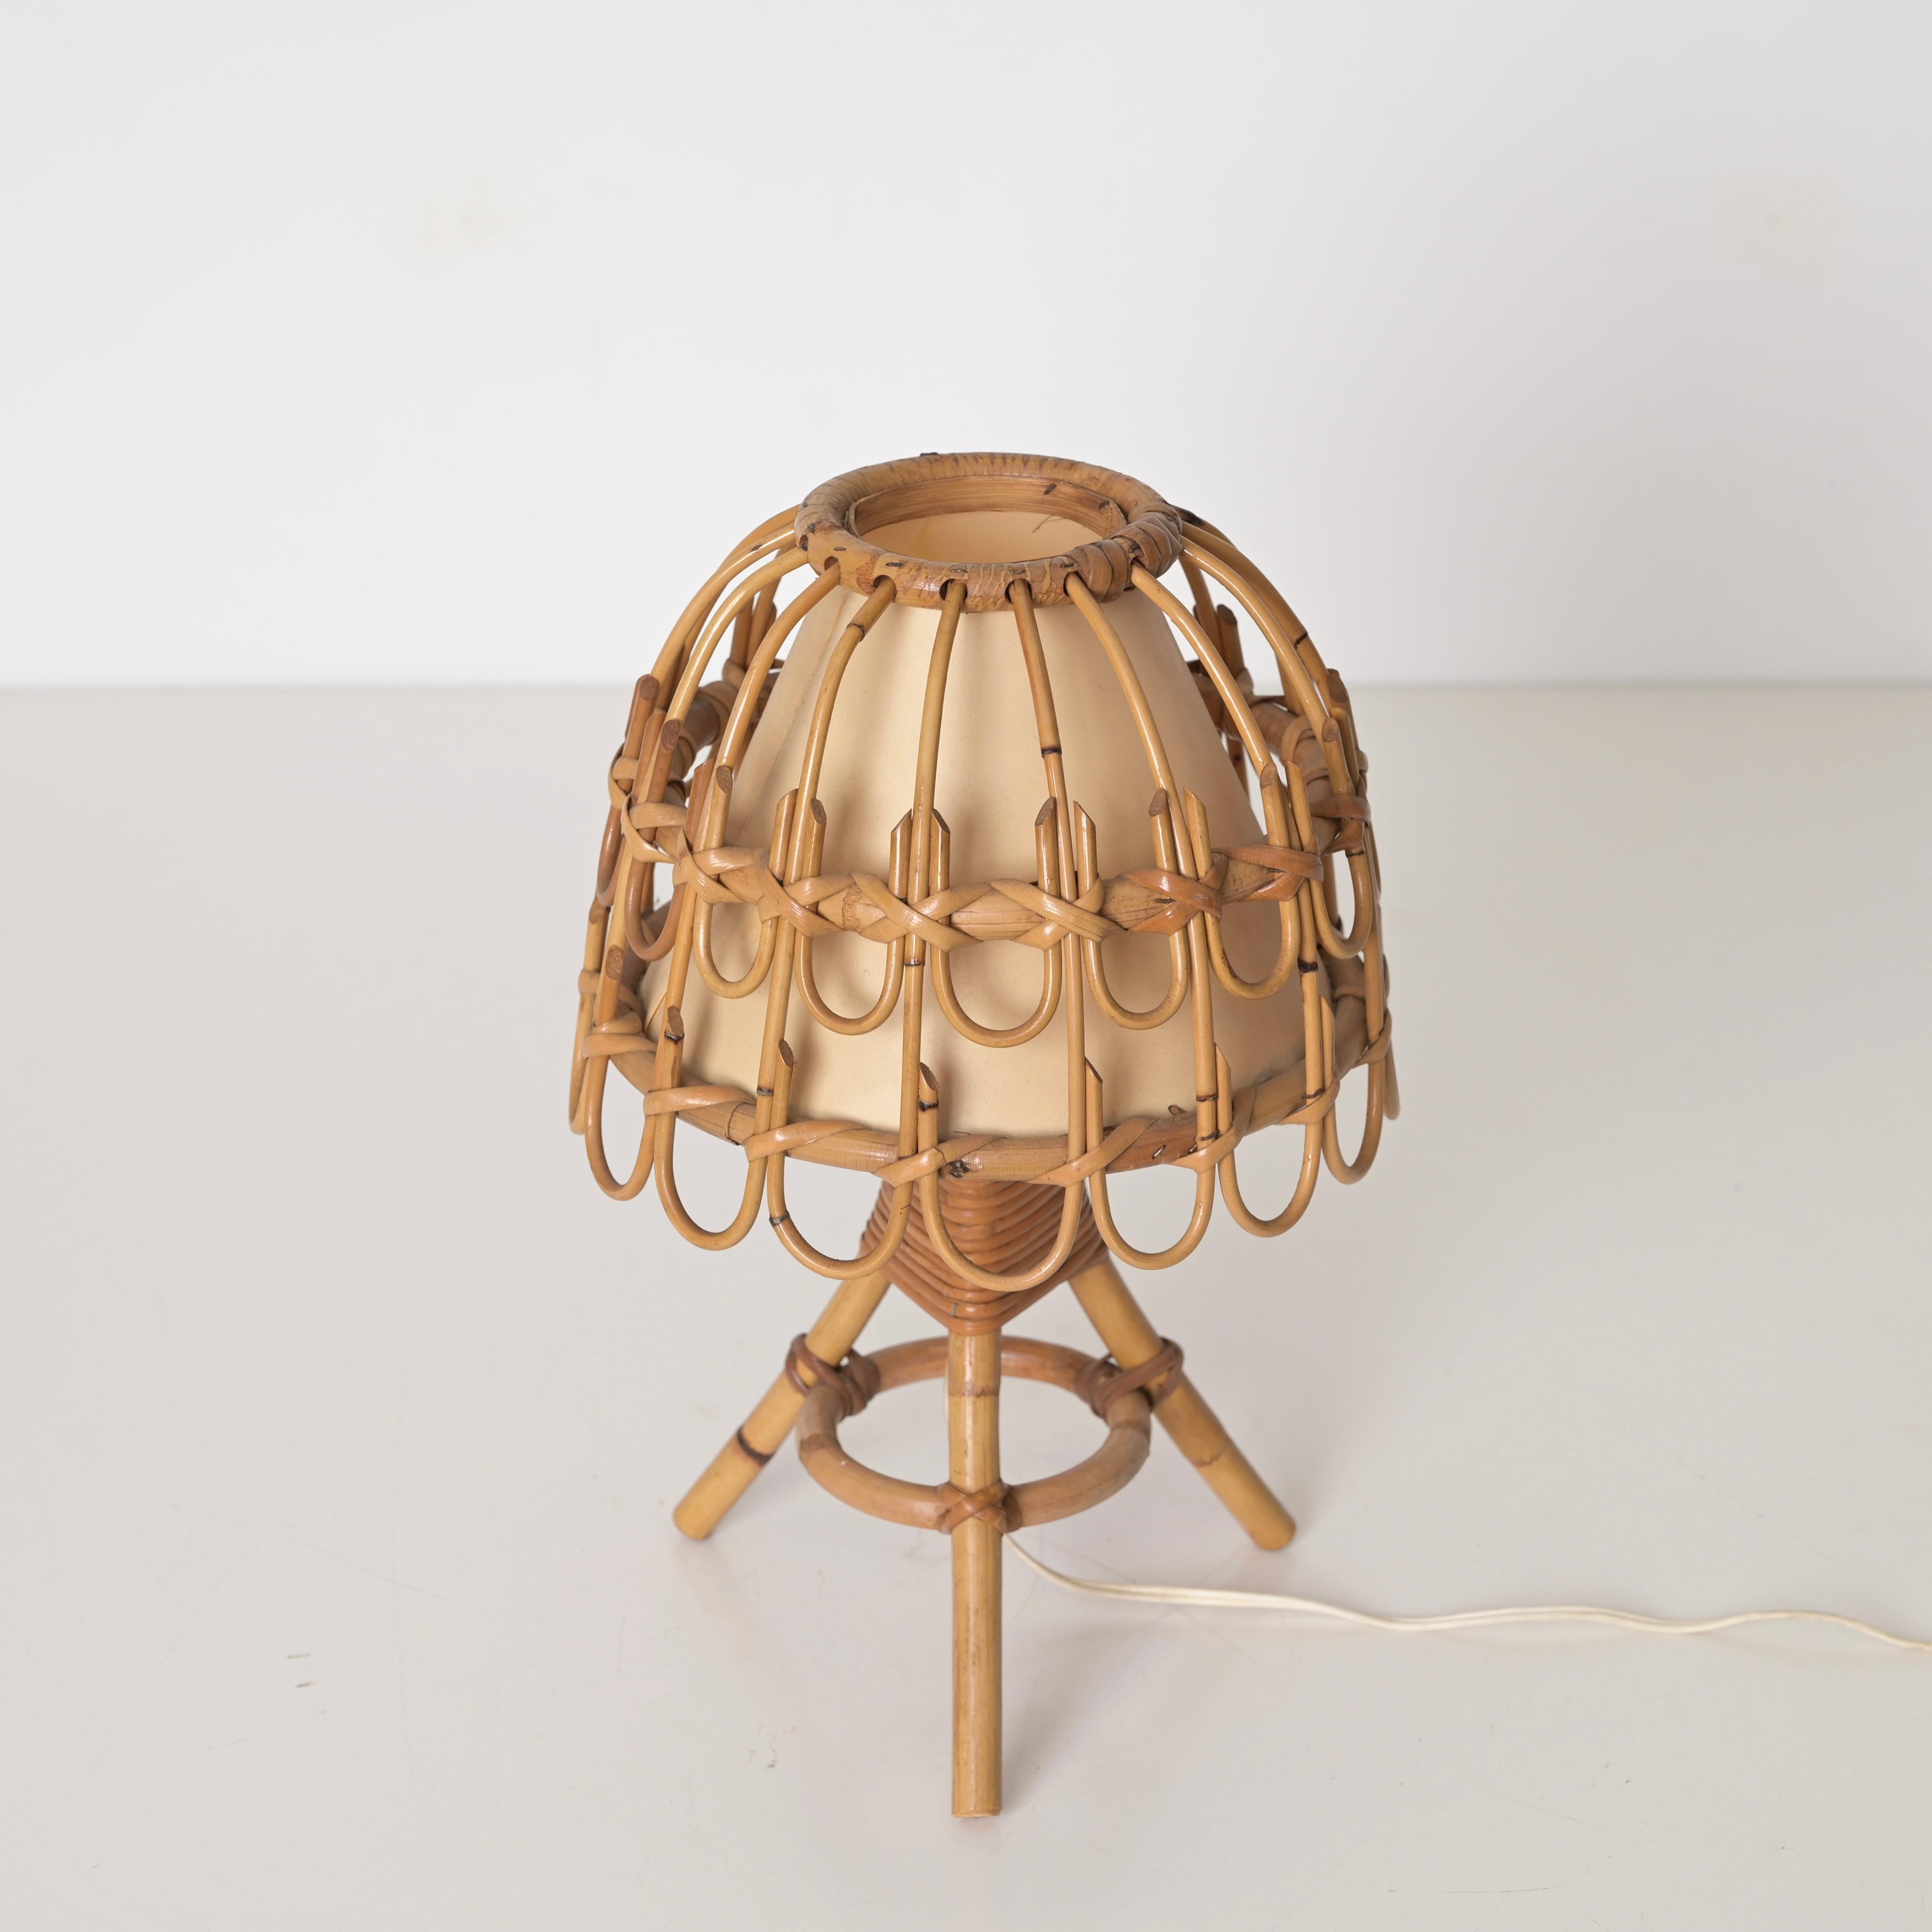 Bamboo Pair of Midcentury Table Lamps in Rattan and Wicker, Louis Sognot, France, 1960s